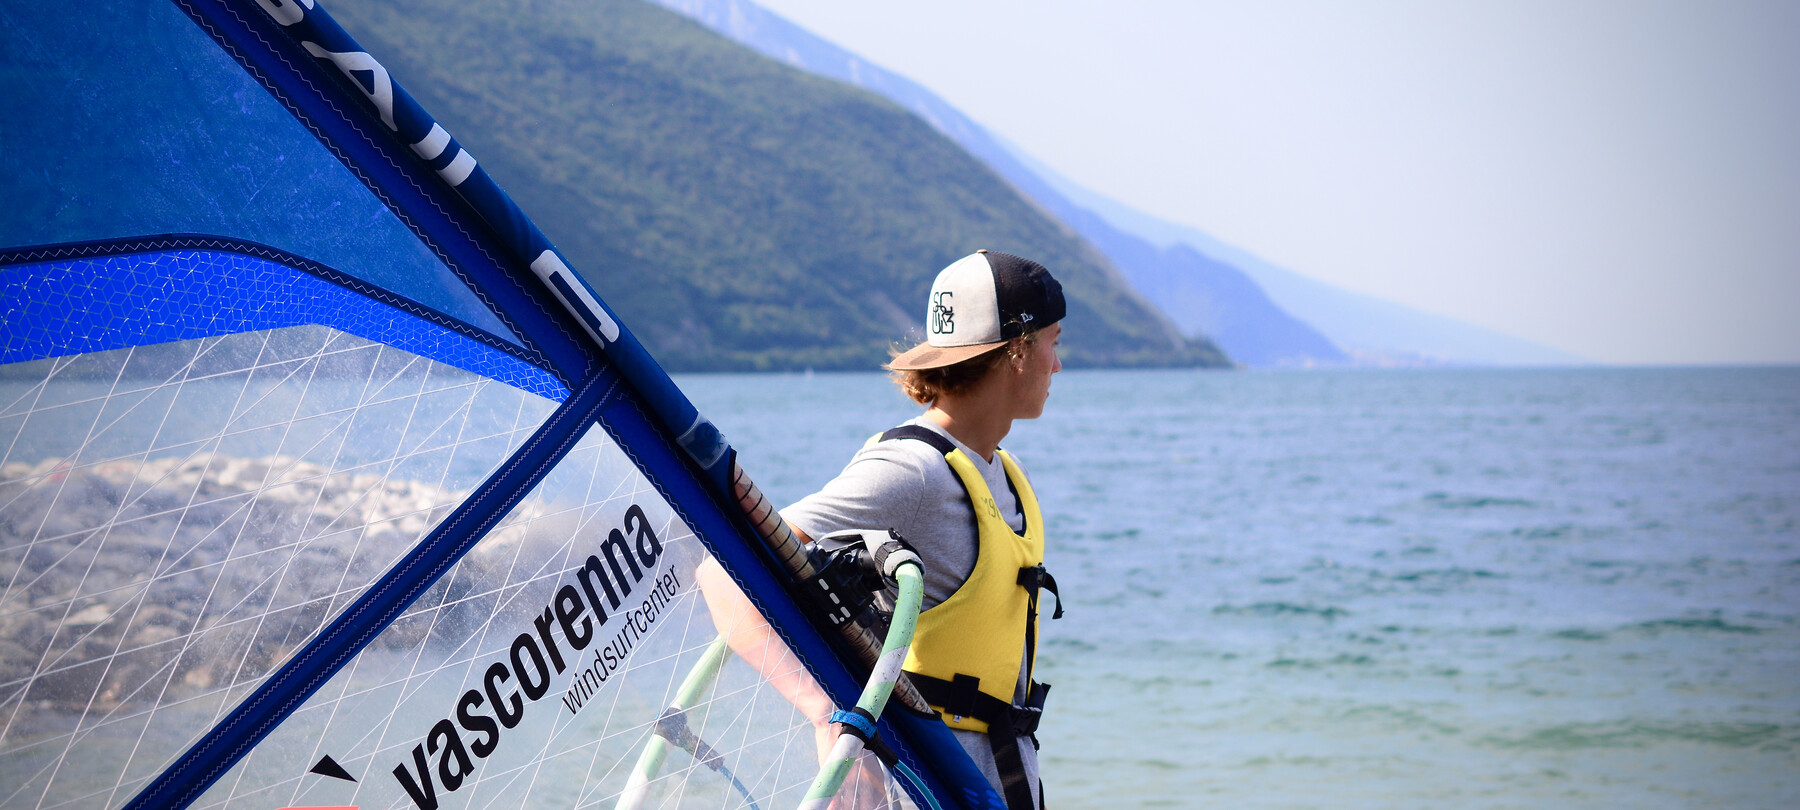 The lakes in Trentino: the story of Nicolò and windsurfing on Lake Garda